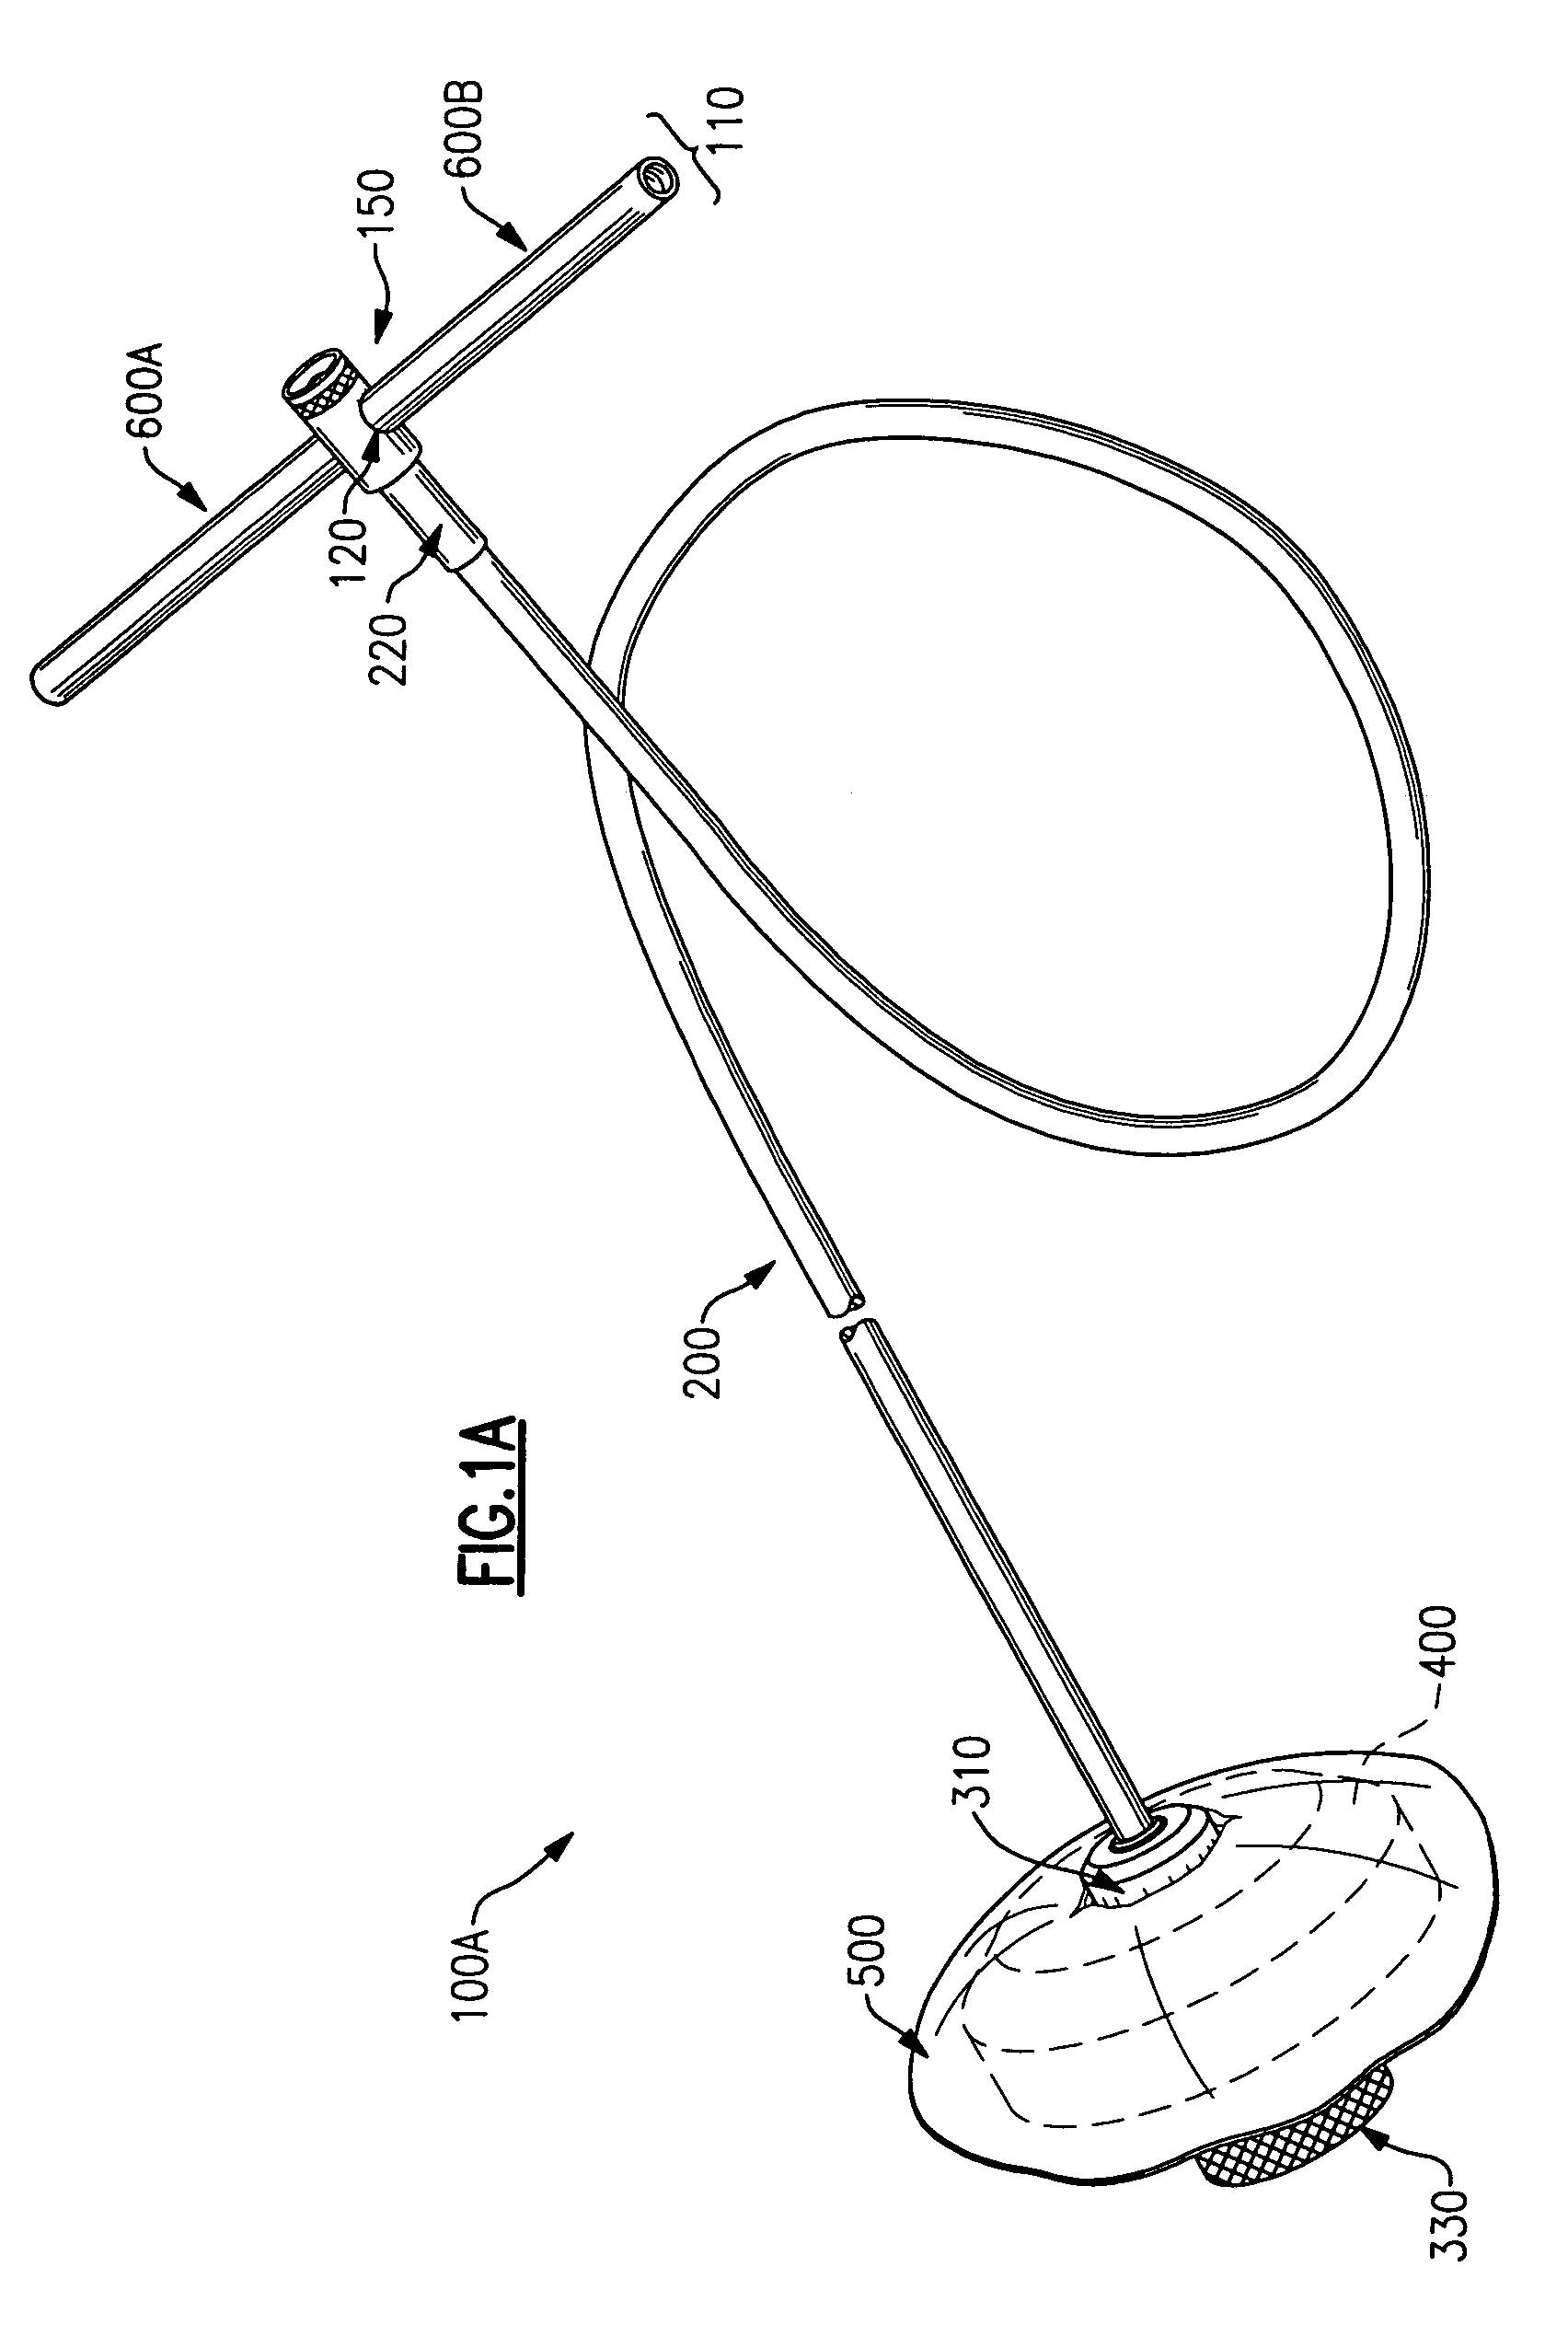 Configurable device for cleaning the barrel of a firearm, and firearm cleaning kit containing components of device